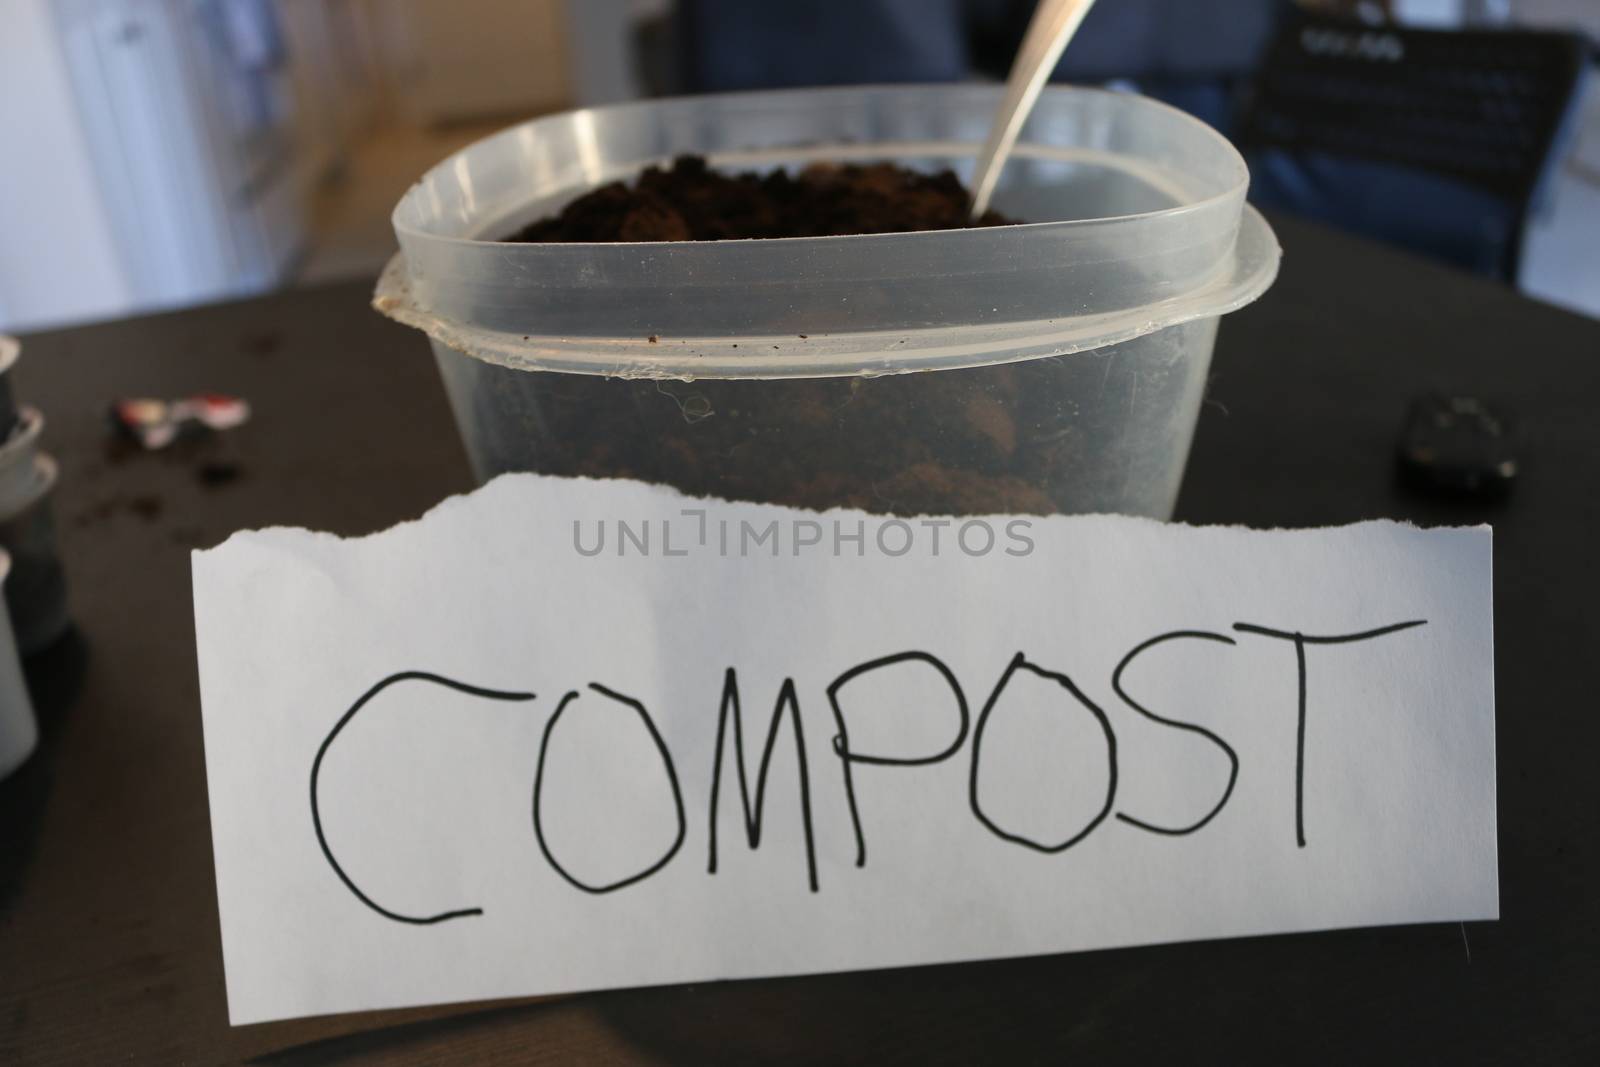 Photo of a container of used coffee grounds with a sign that says compost.